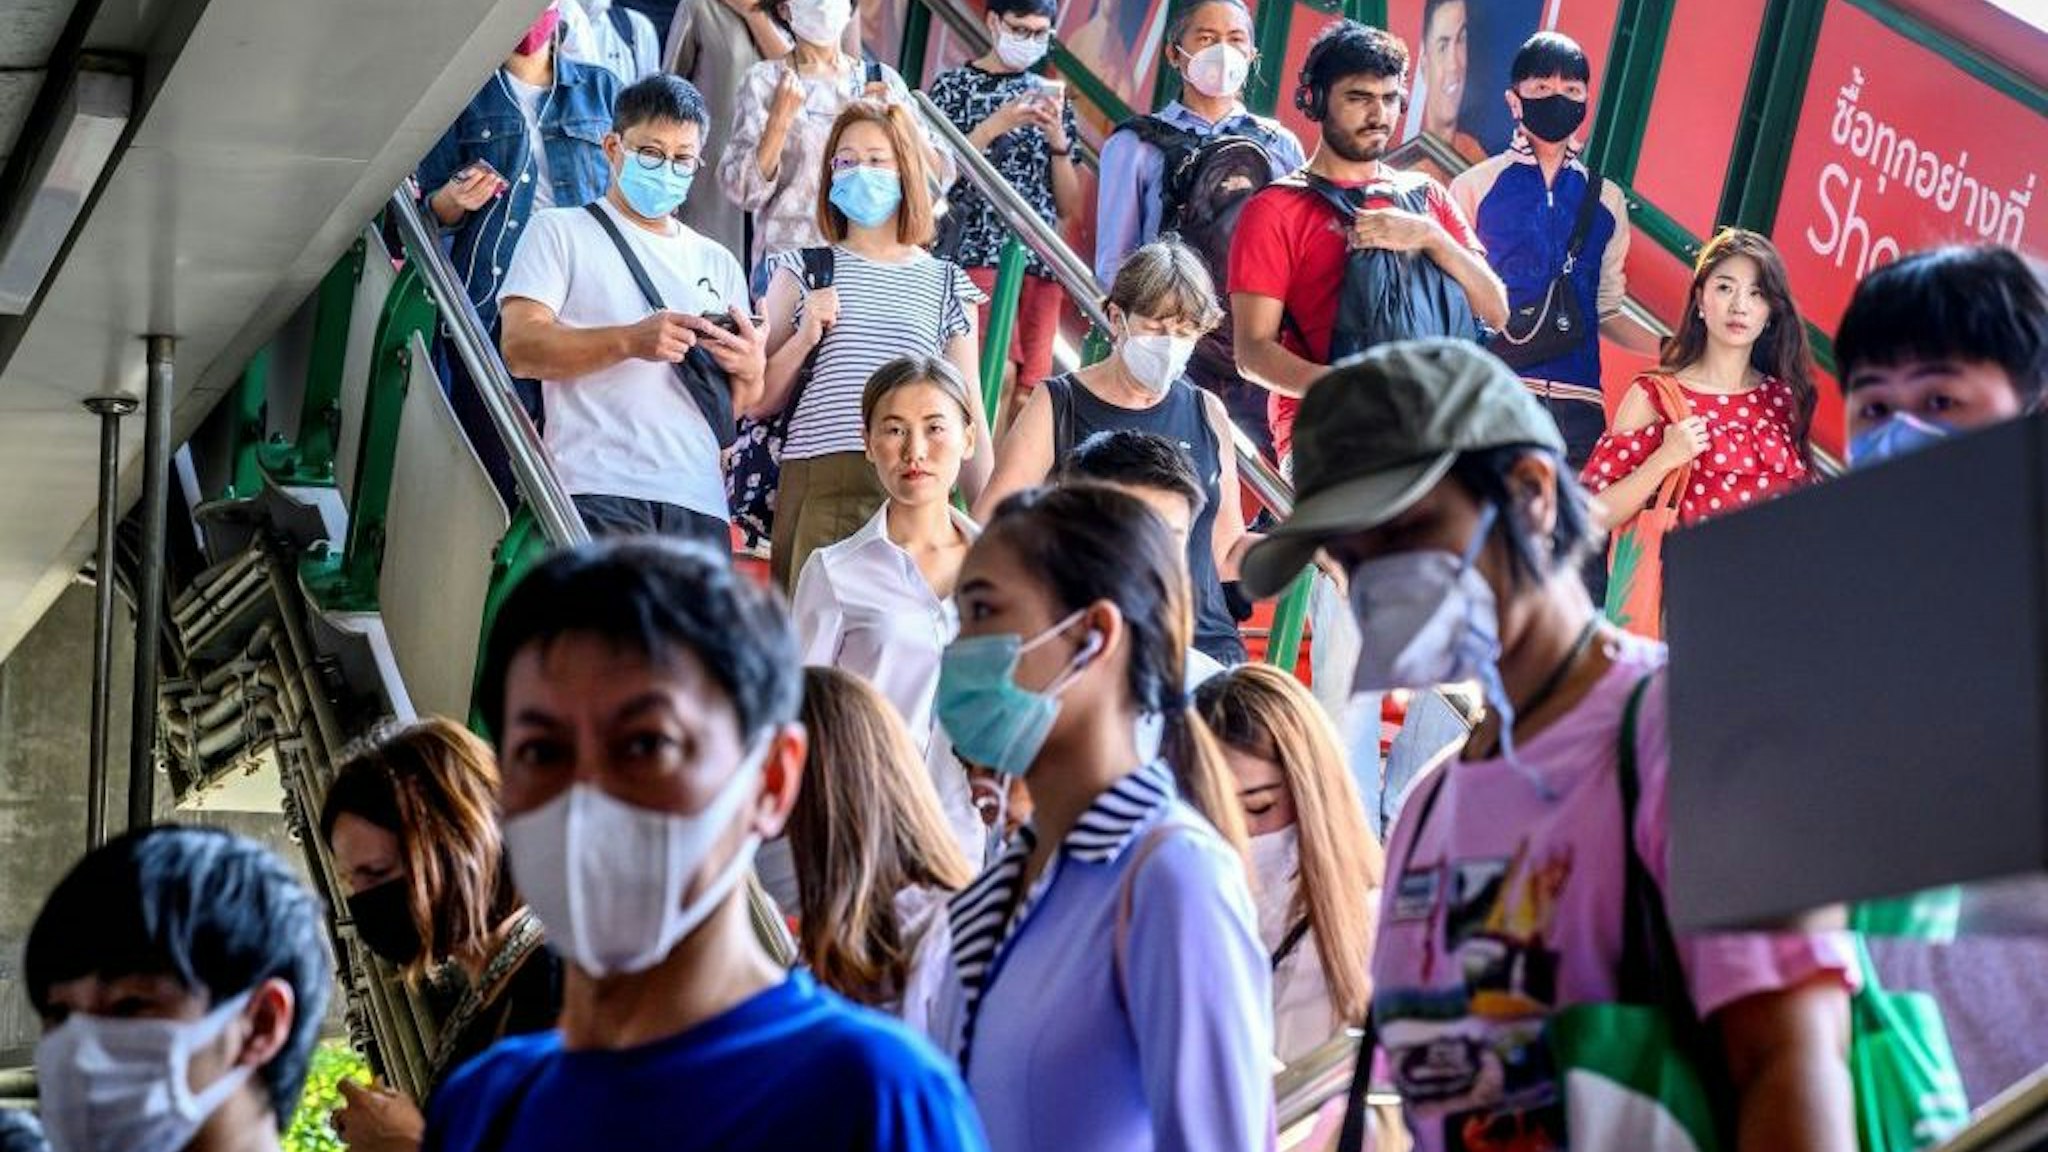 People with face masks arrive at a BTS Sky train station in Bangkok on January 27, 2020. - Thailand has detected eight Coronavirus cases so far -- three of whom are receiving treatment in hospital and five of whom have been discharged, according to a statement from Health Minister Anutin Charnvirakul. (Photo by Mladen ANTONOV / AFP) (Photo by MLADEN ANTONOV/AFP via Getty Images)